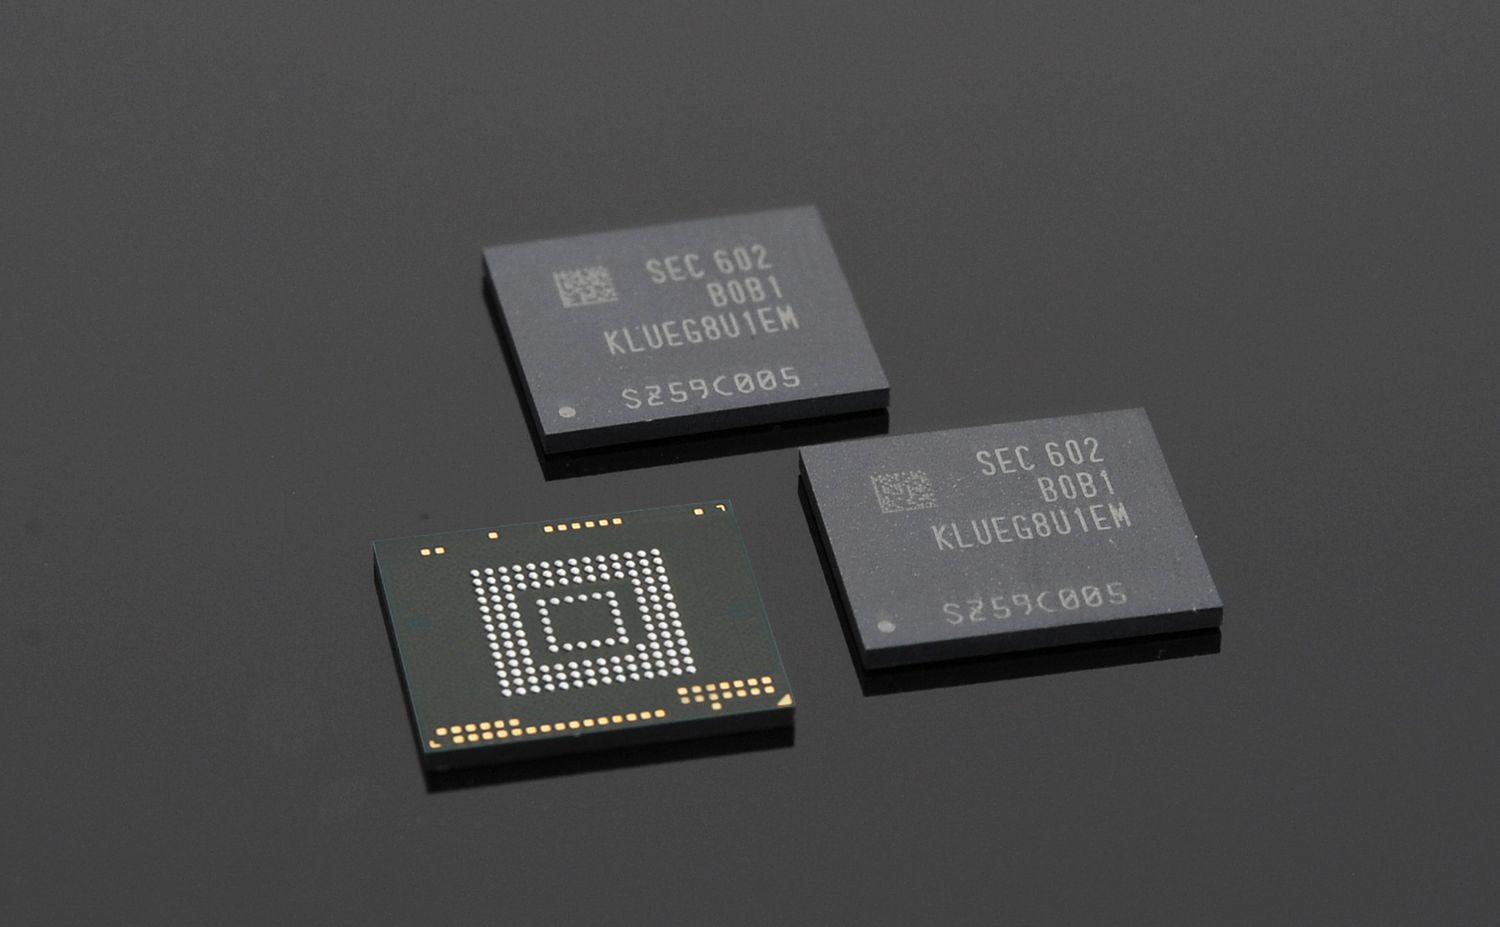 Samsung is investing billions to increase production of memory chips